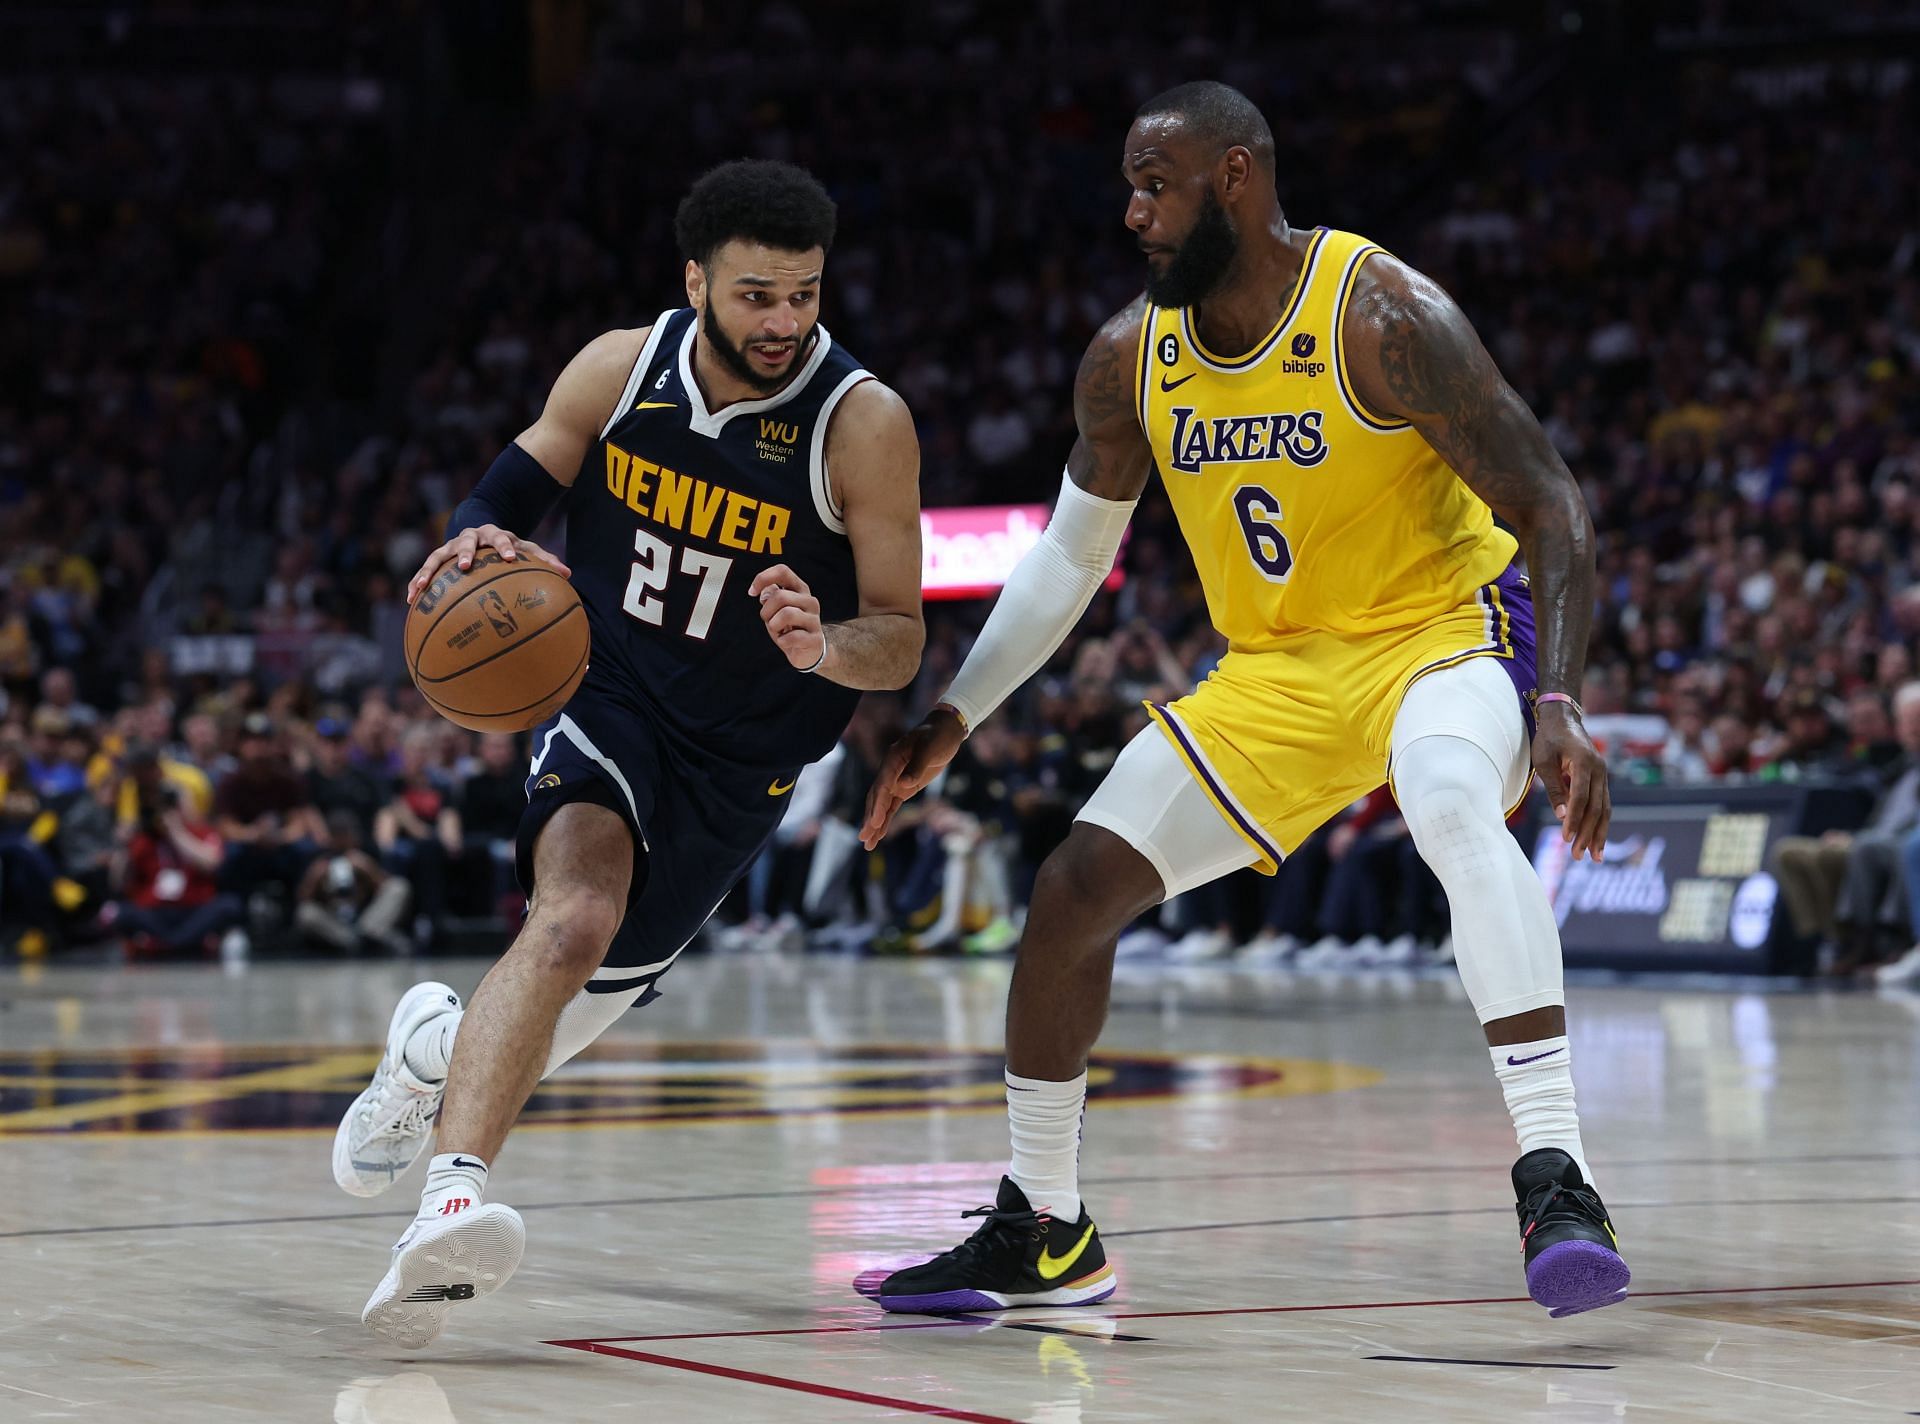 NBA Updates - REPORT: The Los Angeles Lakers are preparing to